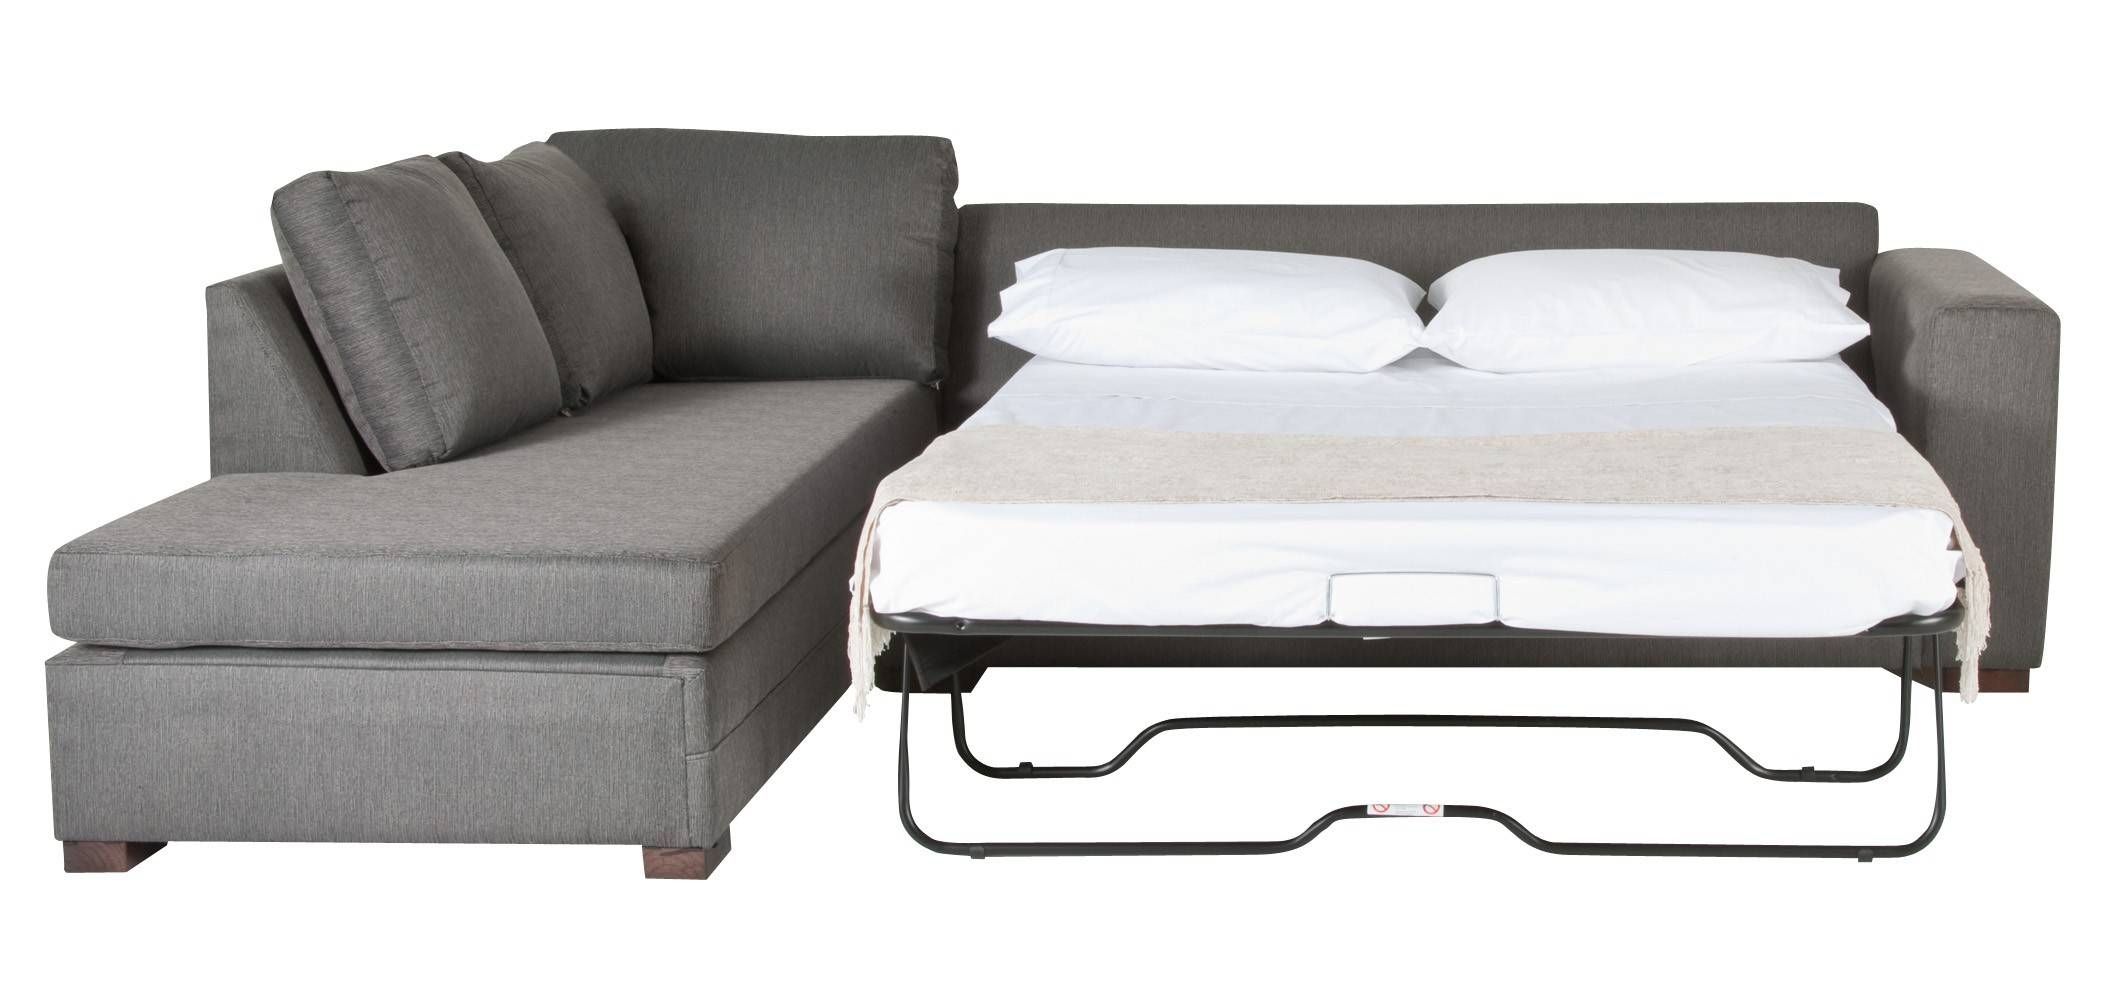 pull out sofa bed with mattress